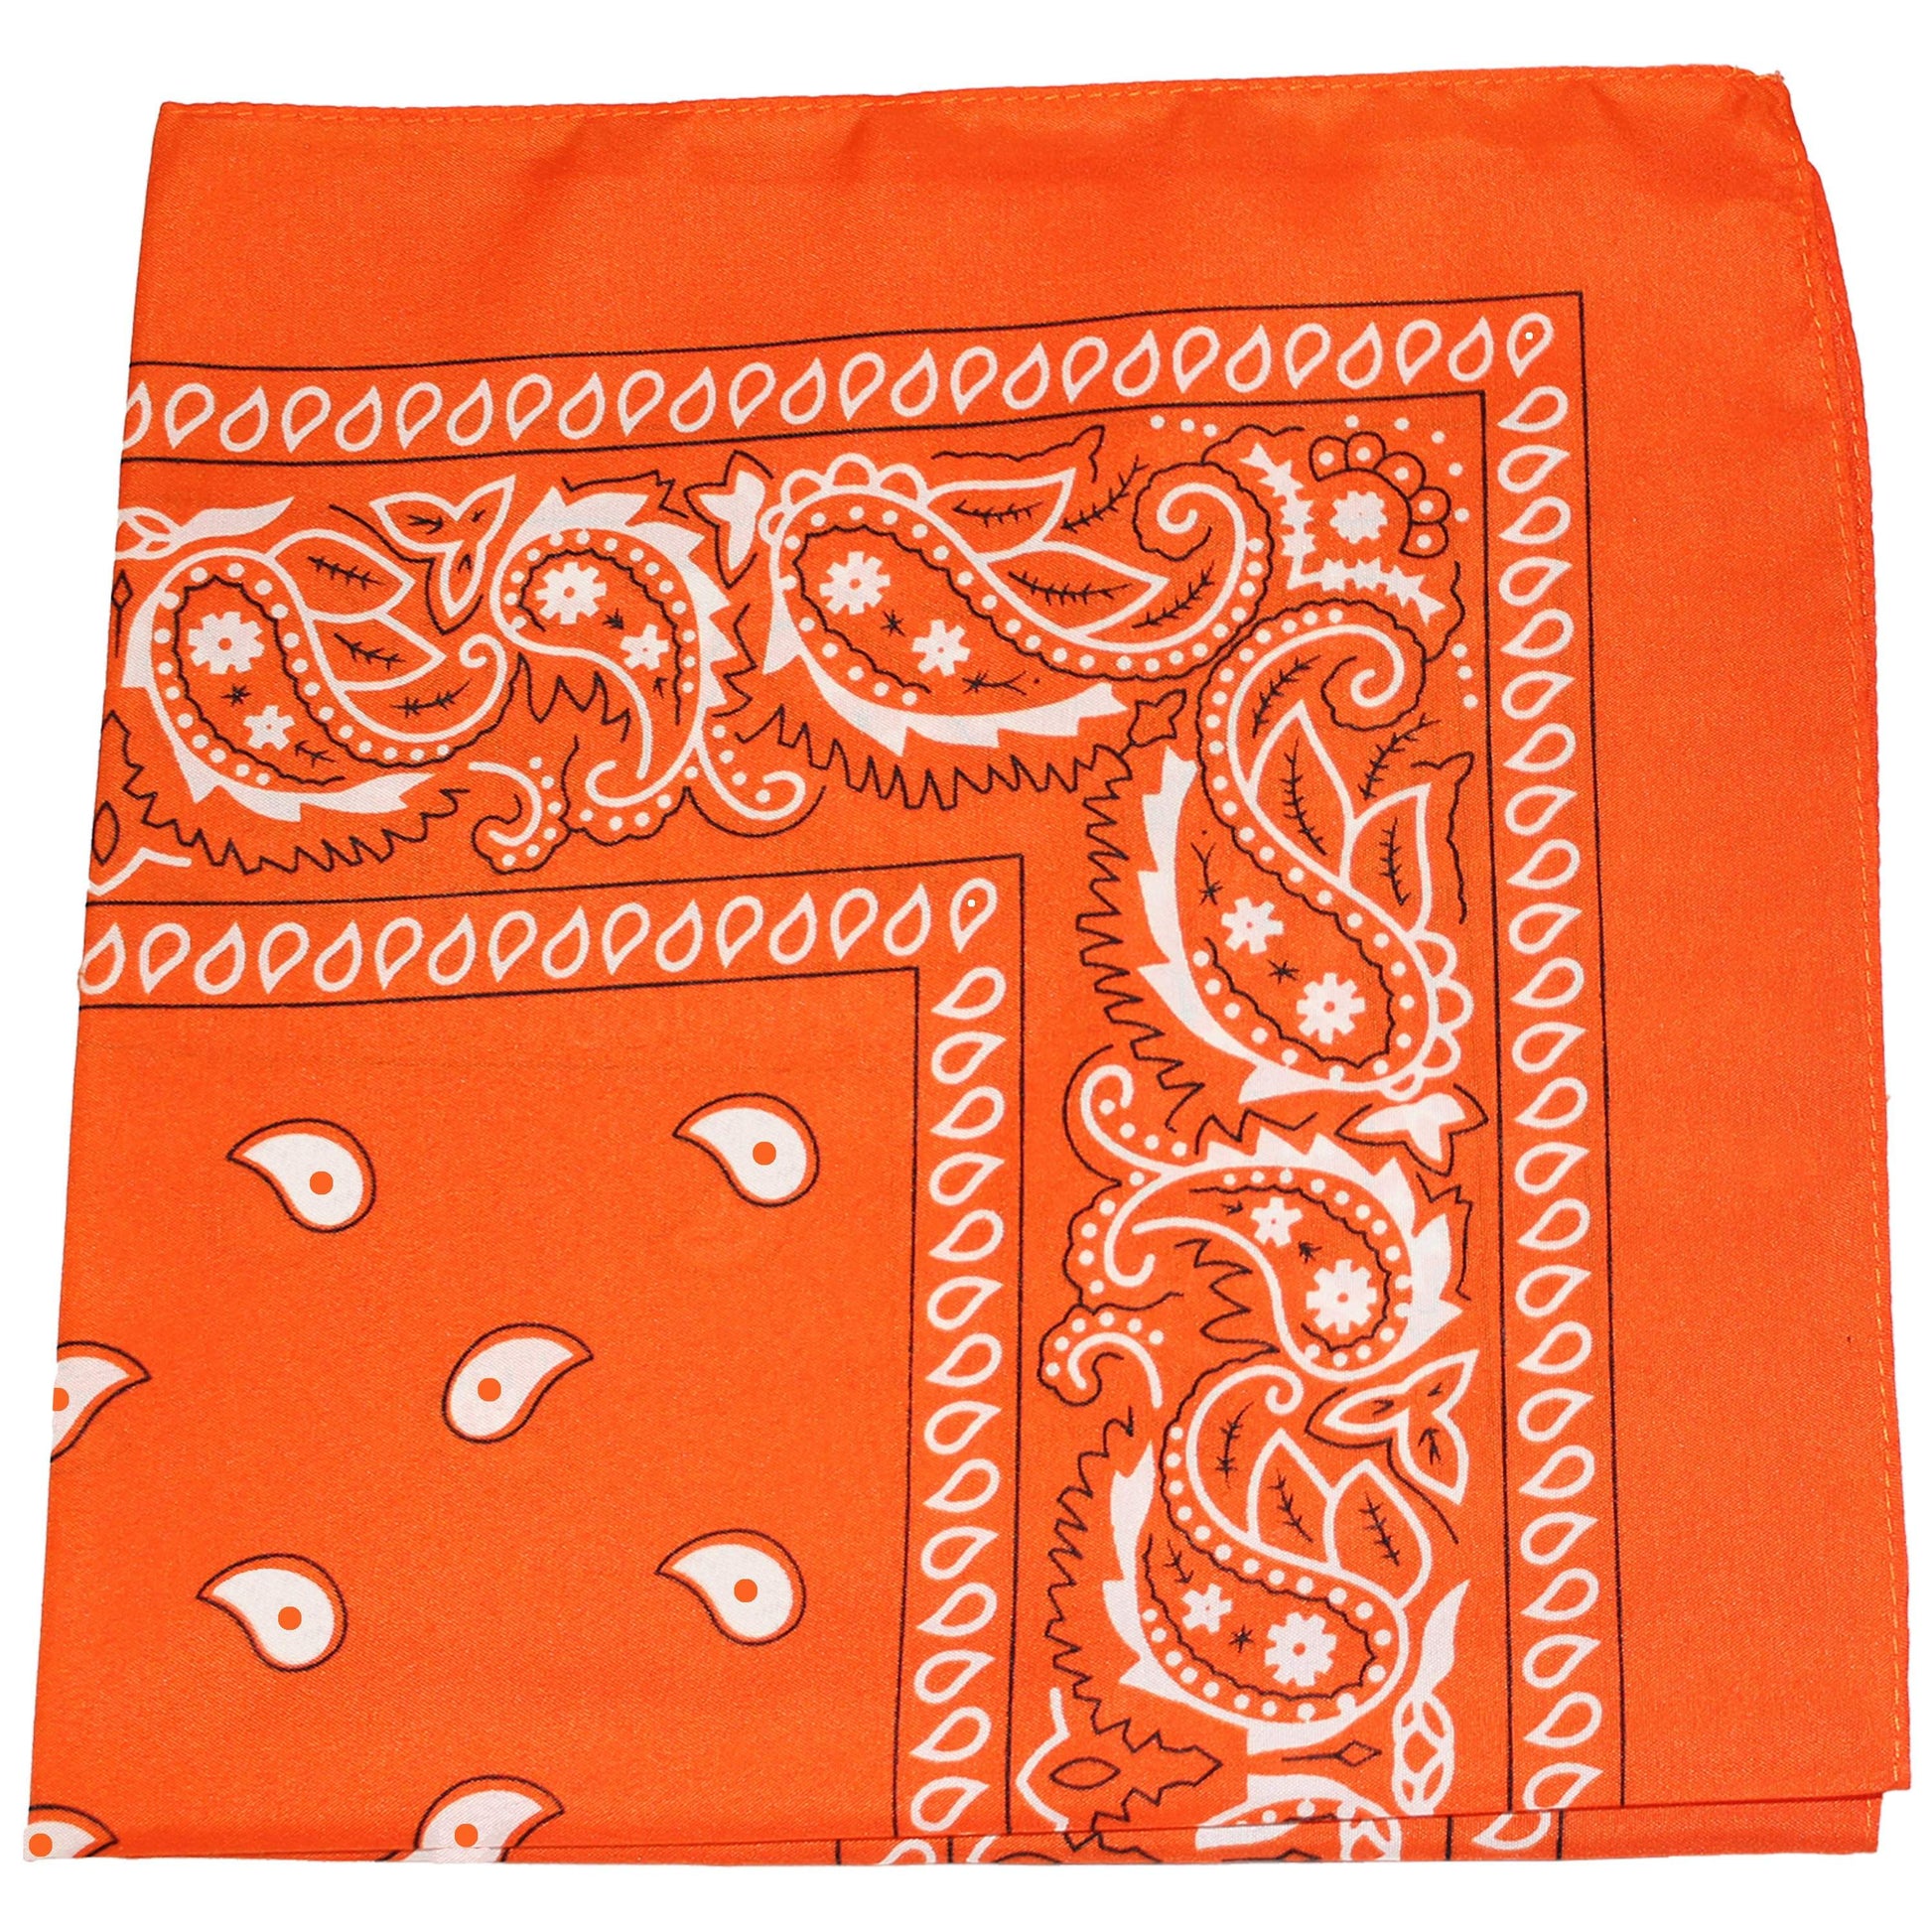 Mechaly Polyester Bandana - Paisley and Solid Colors - Pack of 4